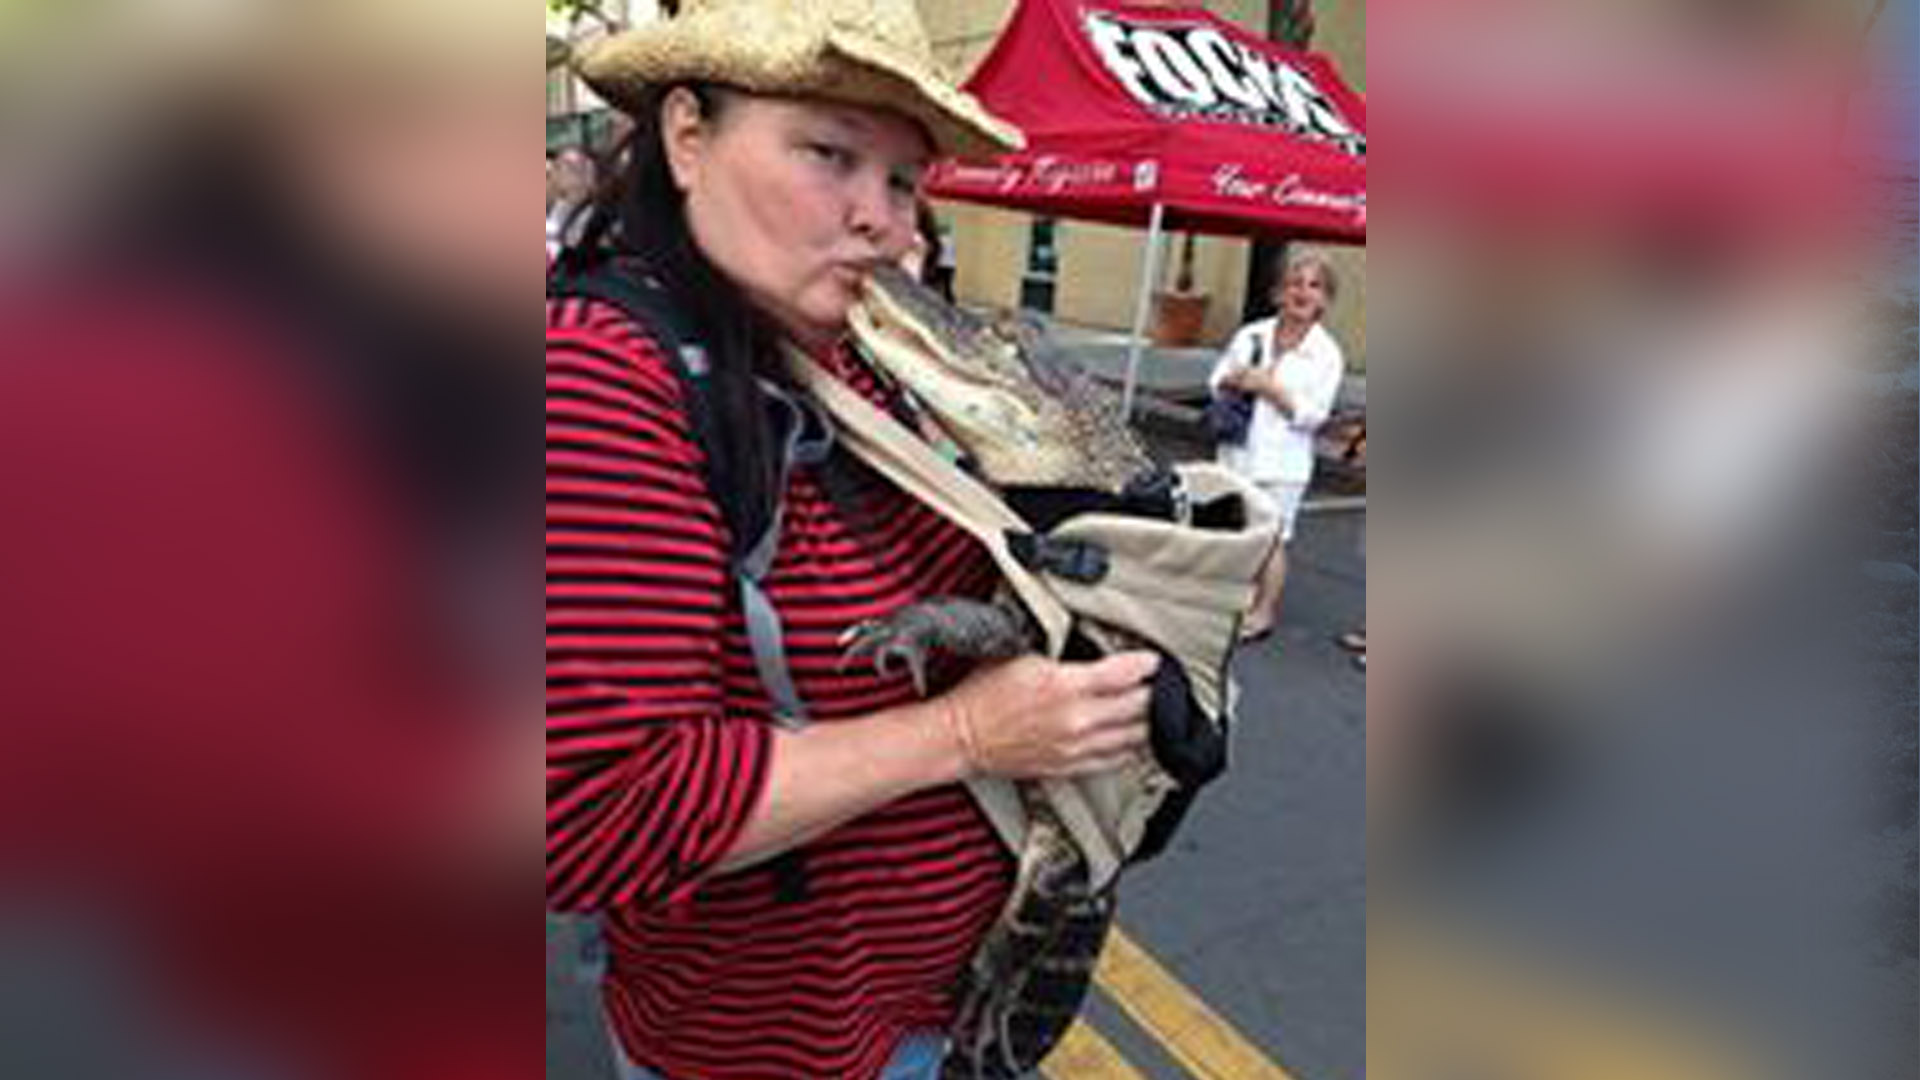 Florida woman fights to keep pet alligator 'Rambo' at home